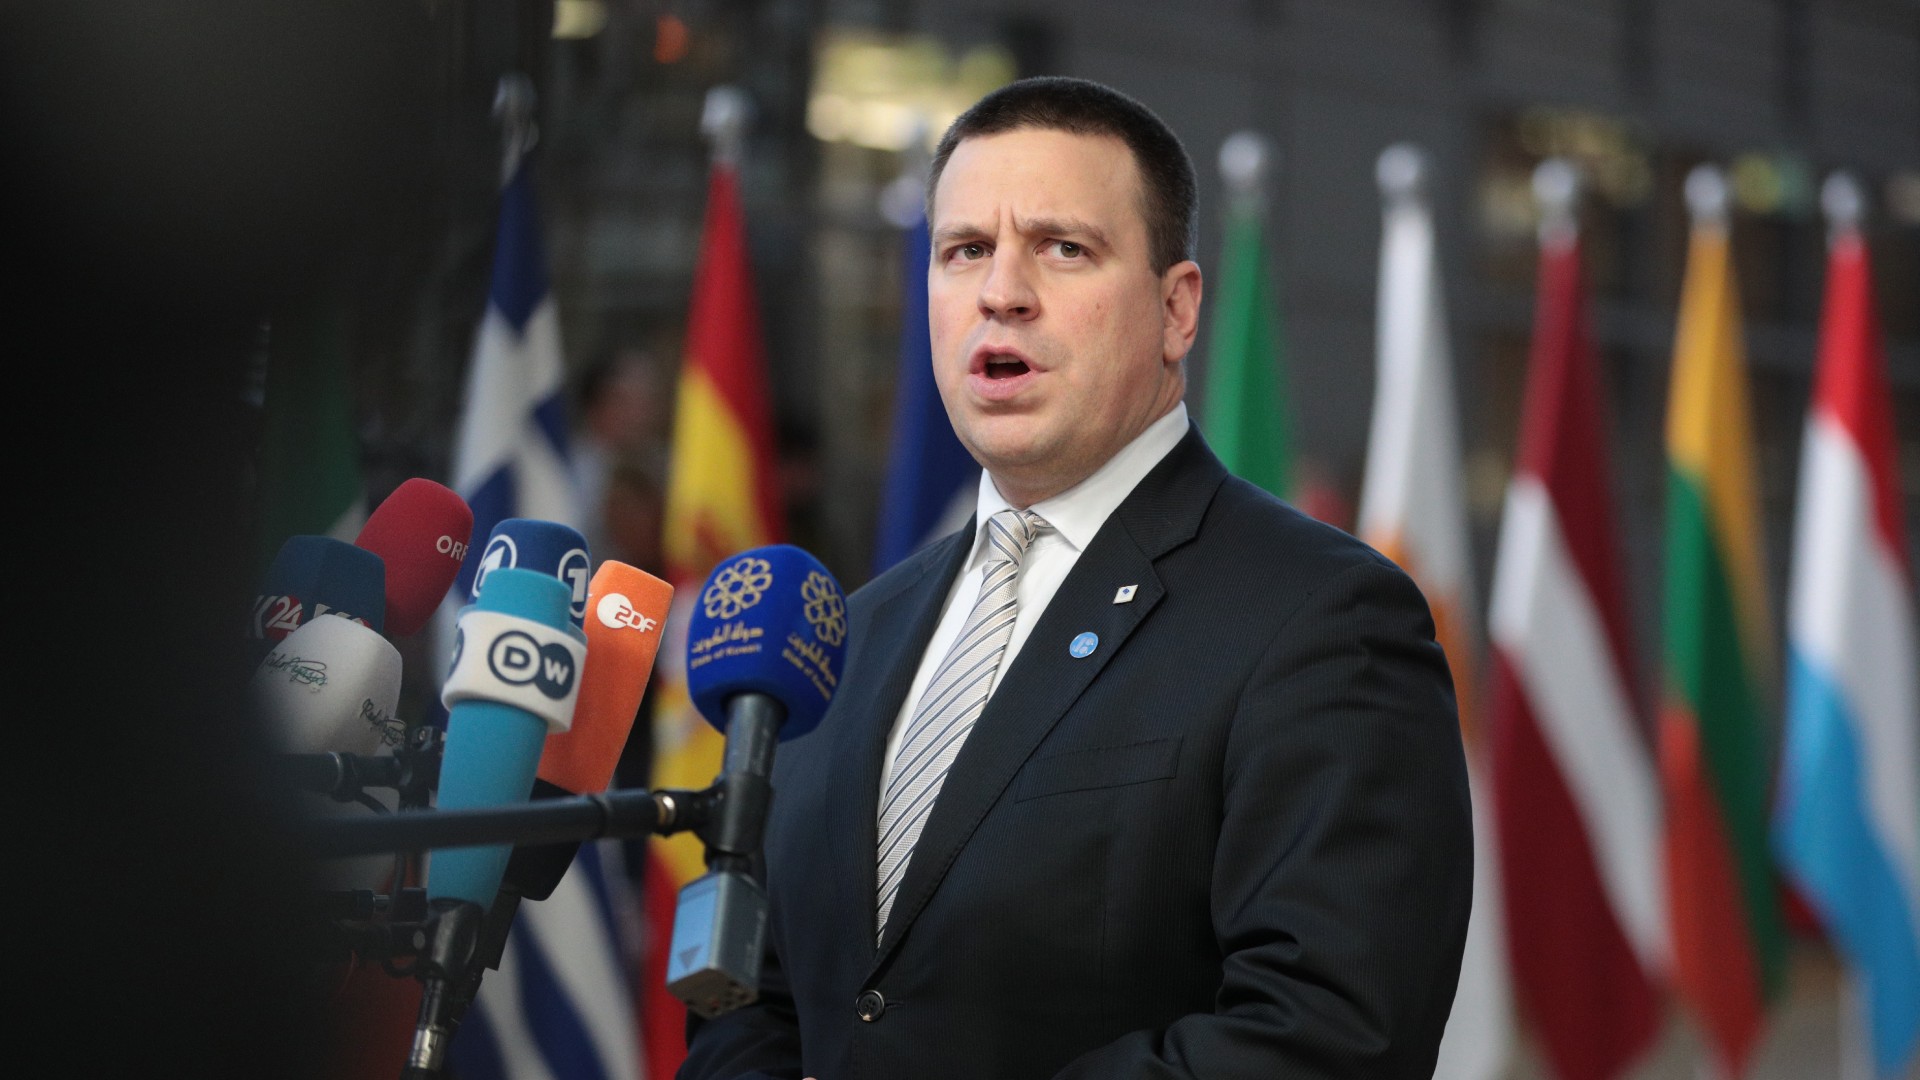 Estonia’s PM Resigns Over Corruption Scandal in His Party